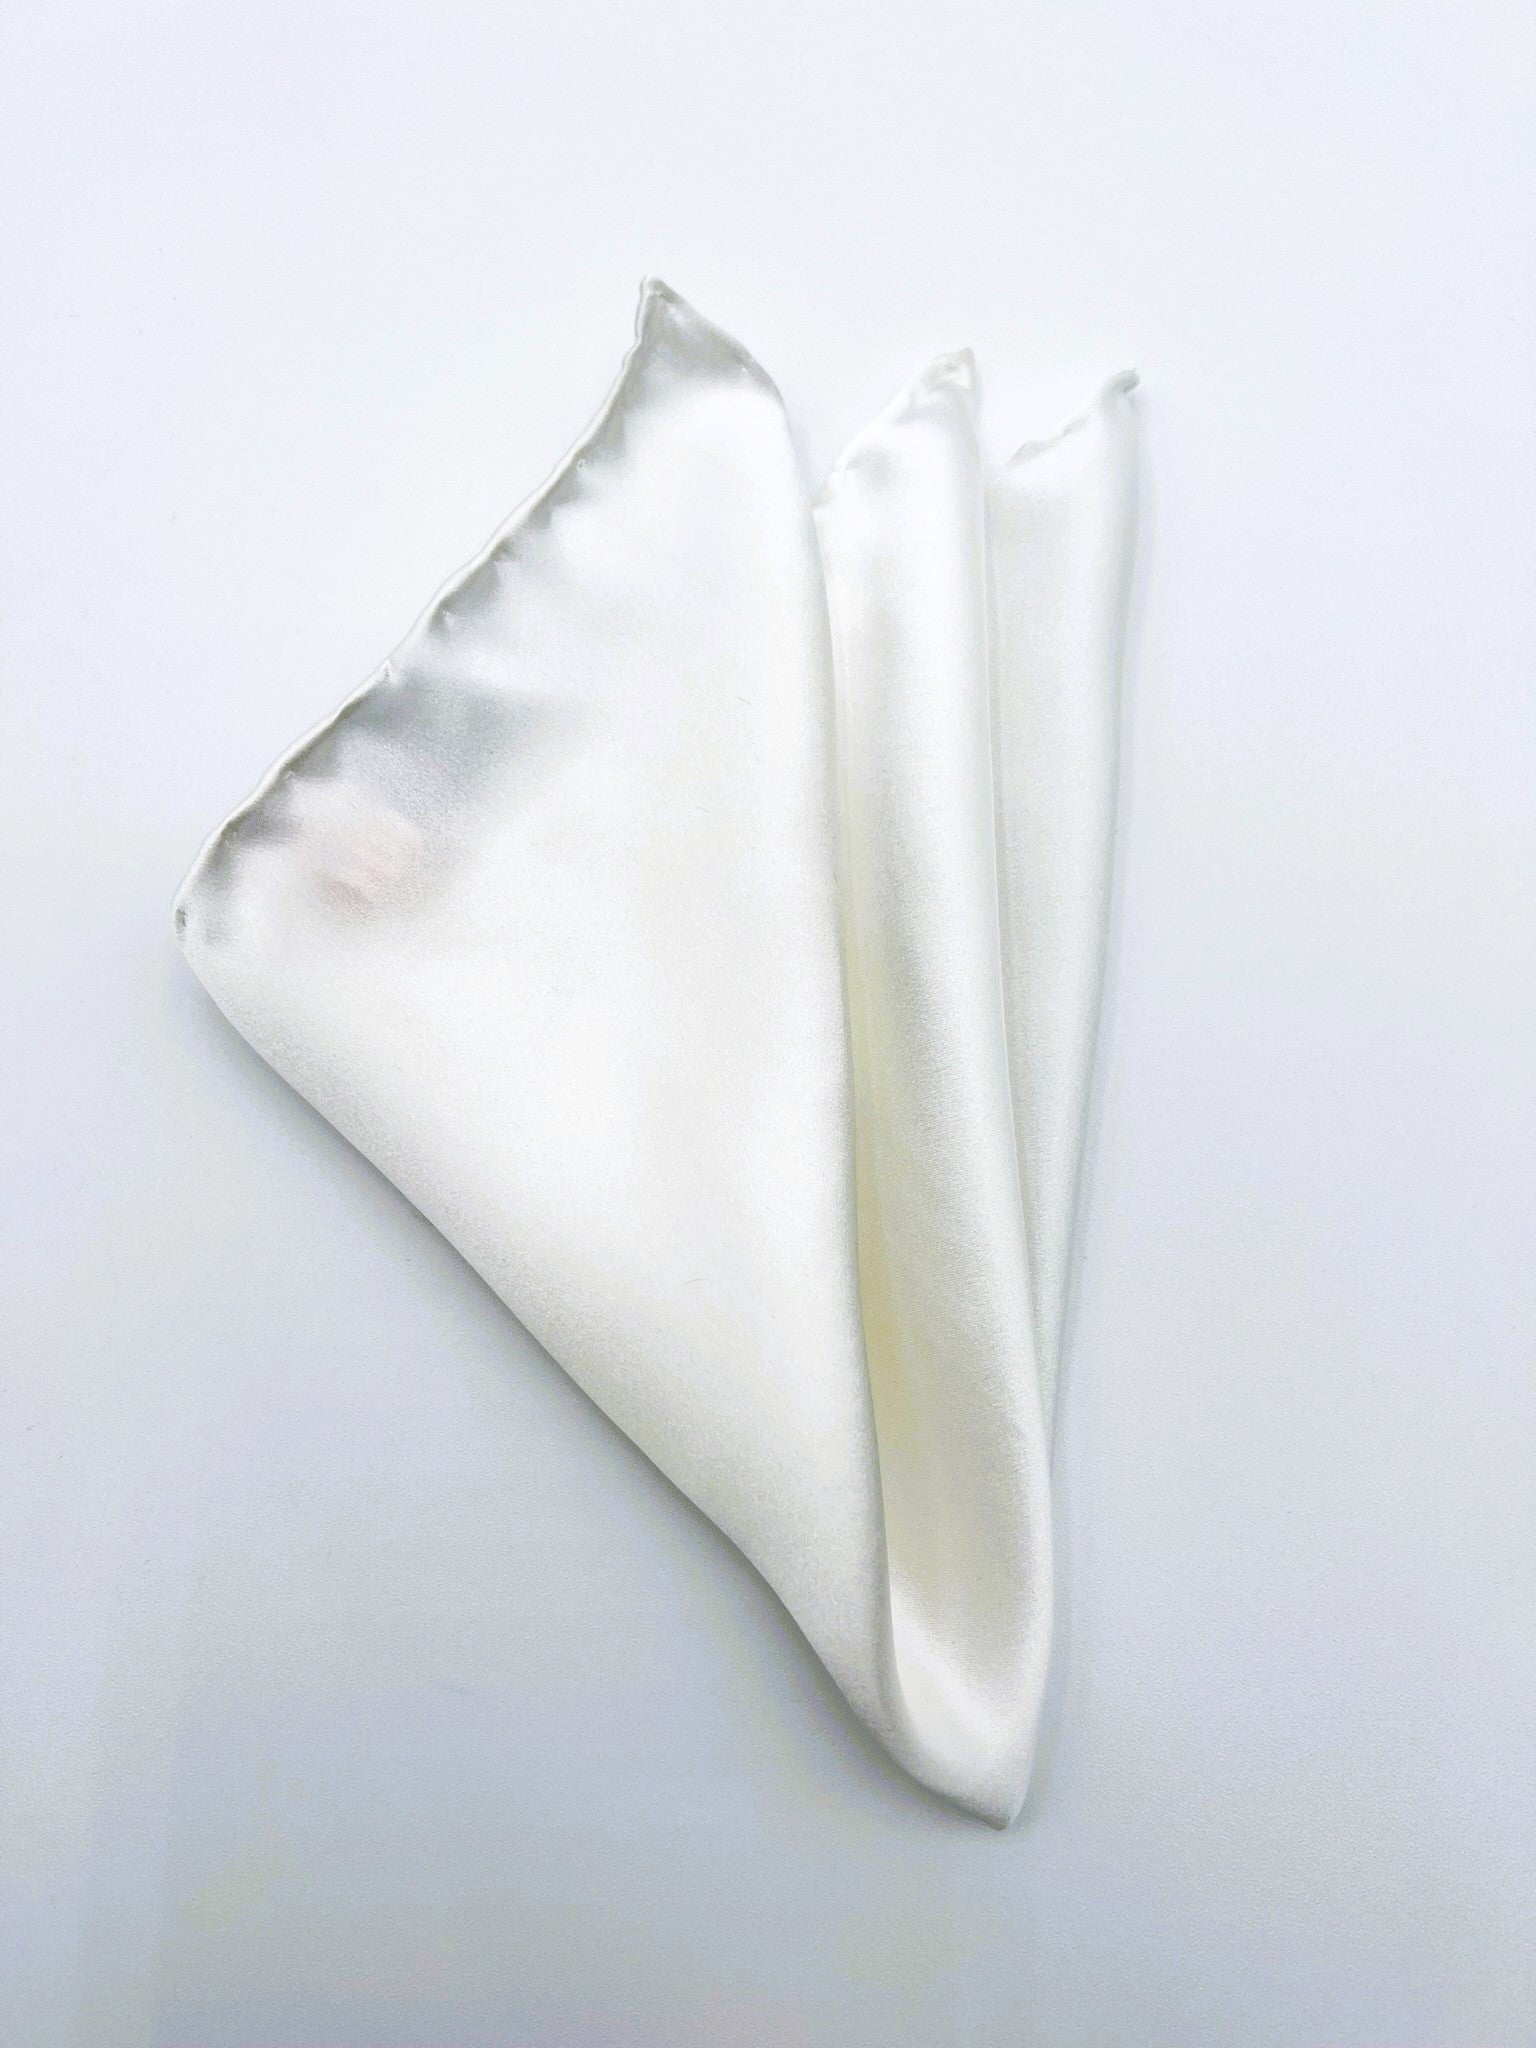 Pearl White Silk Pocket Square. Handmade in Italy. Pocket Square in 100% pure Italian silk,  hand-finished edges. A must-have accessory for every  man&#39;s wardrobe that can suit either  a classic or sophisticated look.| Sartoria Dei Duchi - Atri